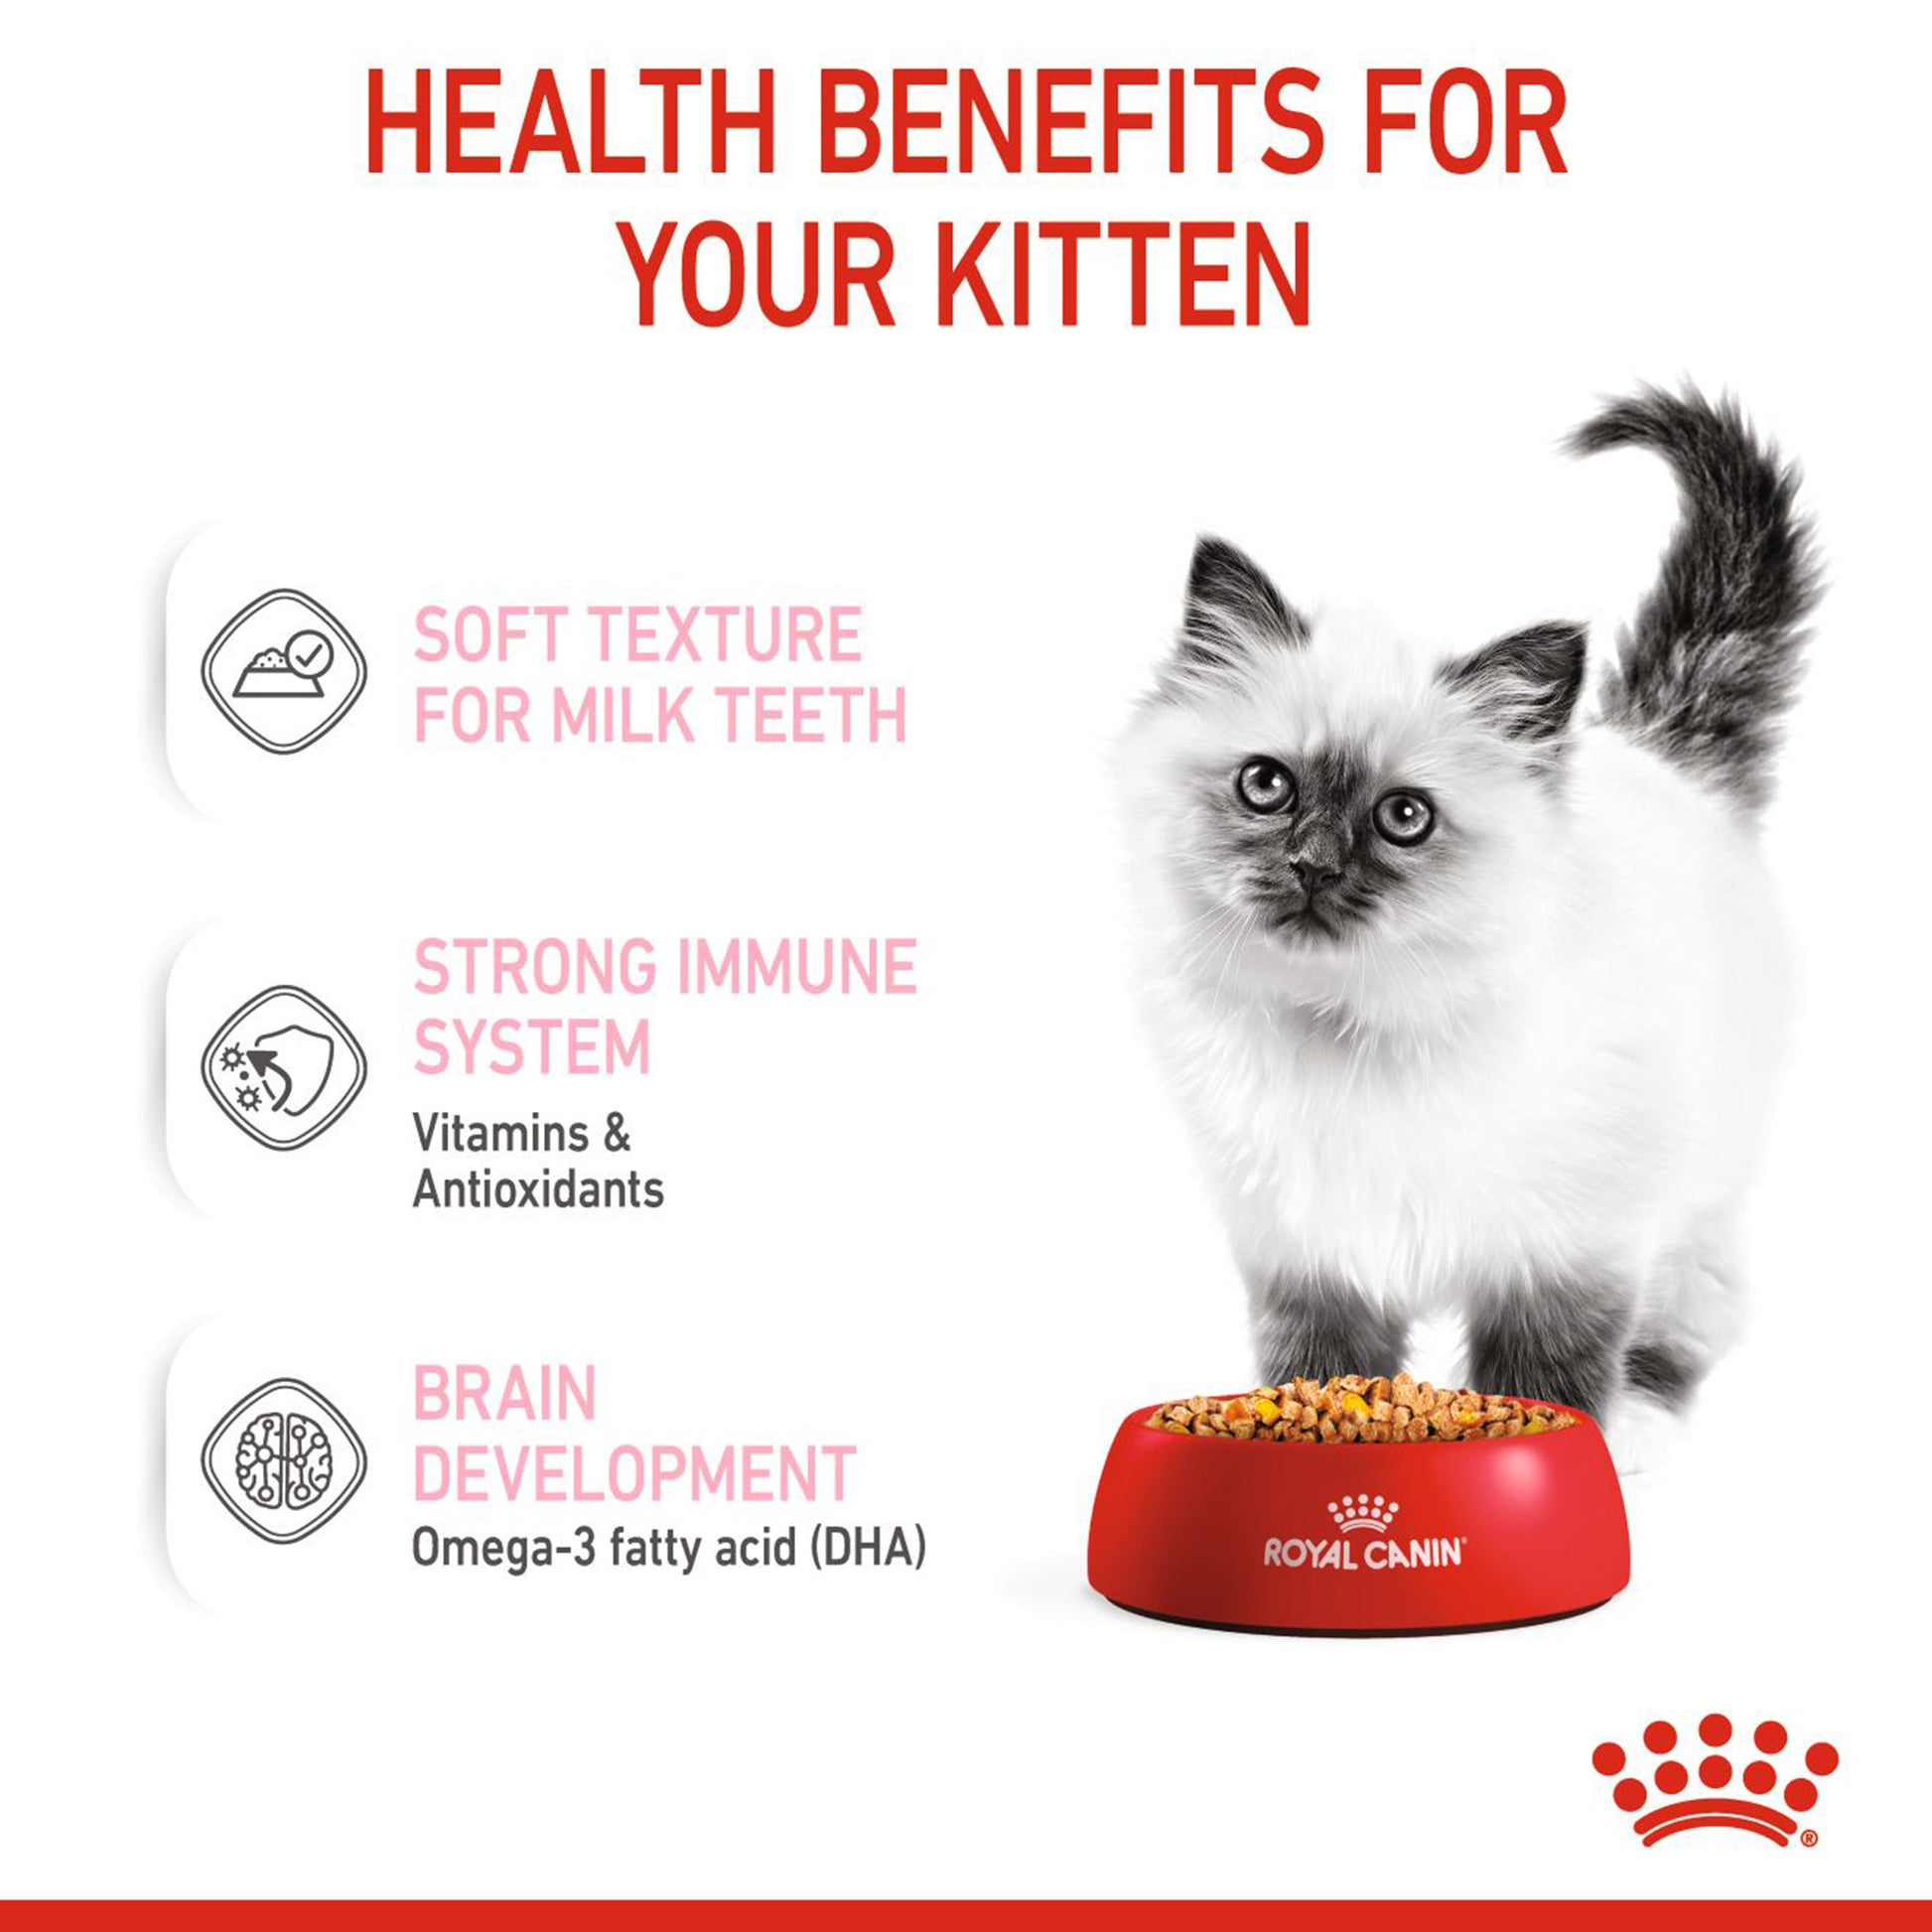 Royal Canin Kitten Jelly Wet Cat Food - 85 g packs - Heads Up For Tails